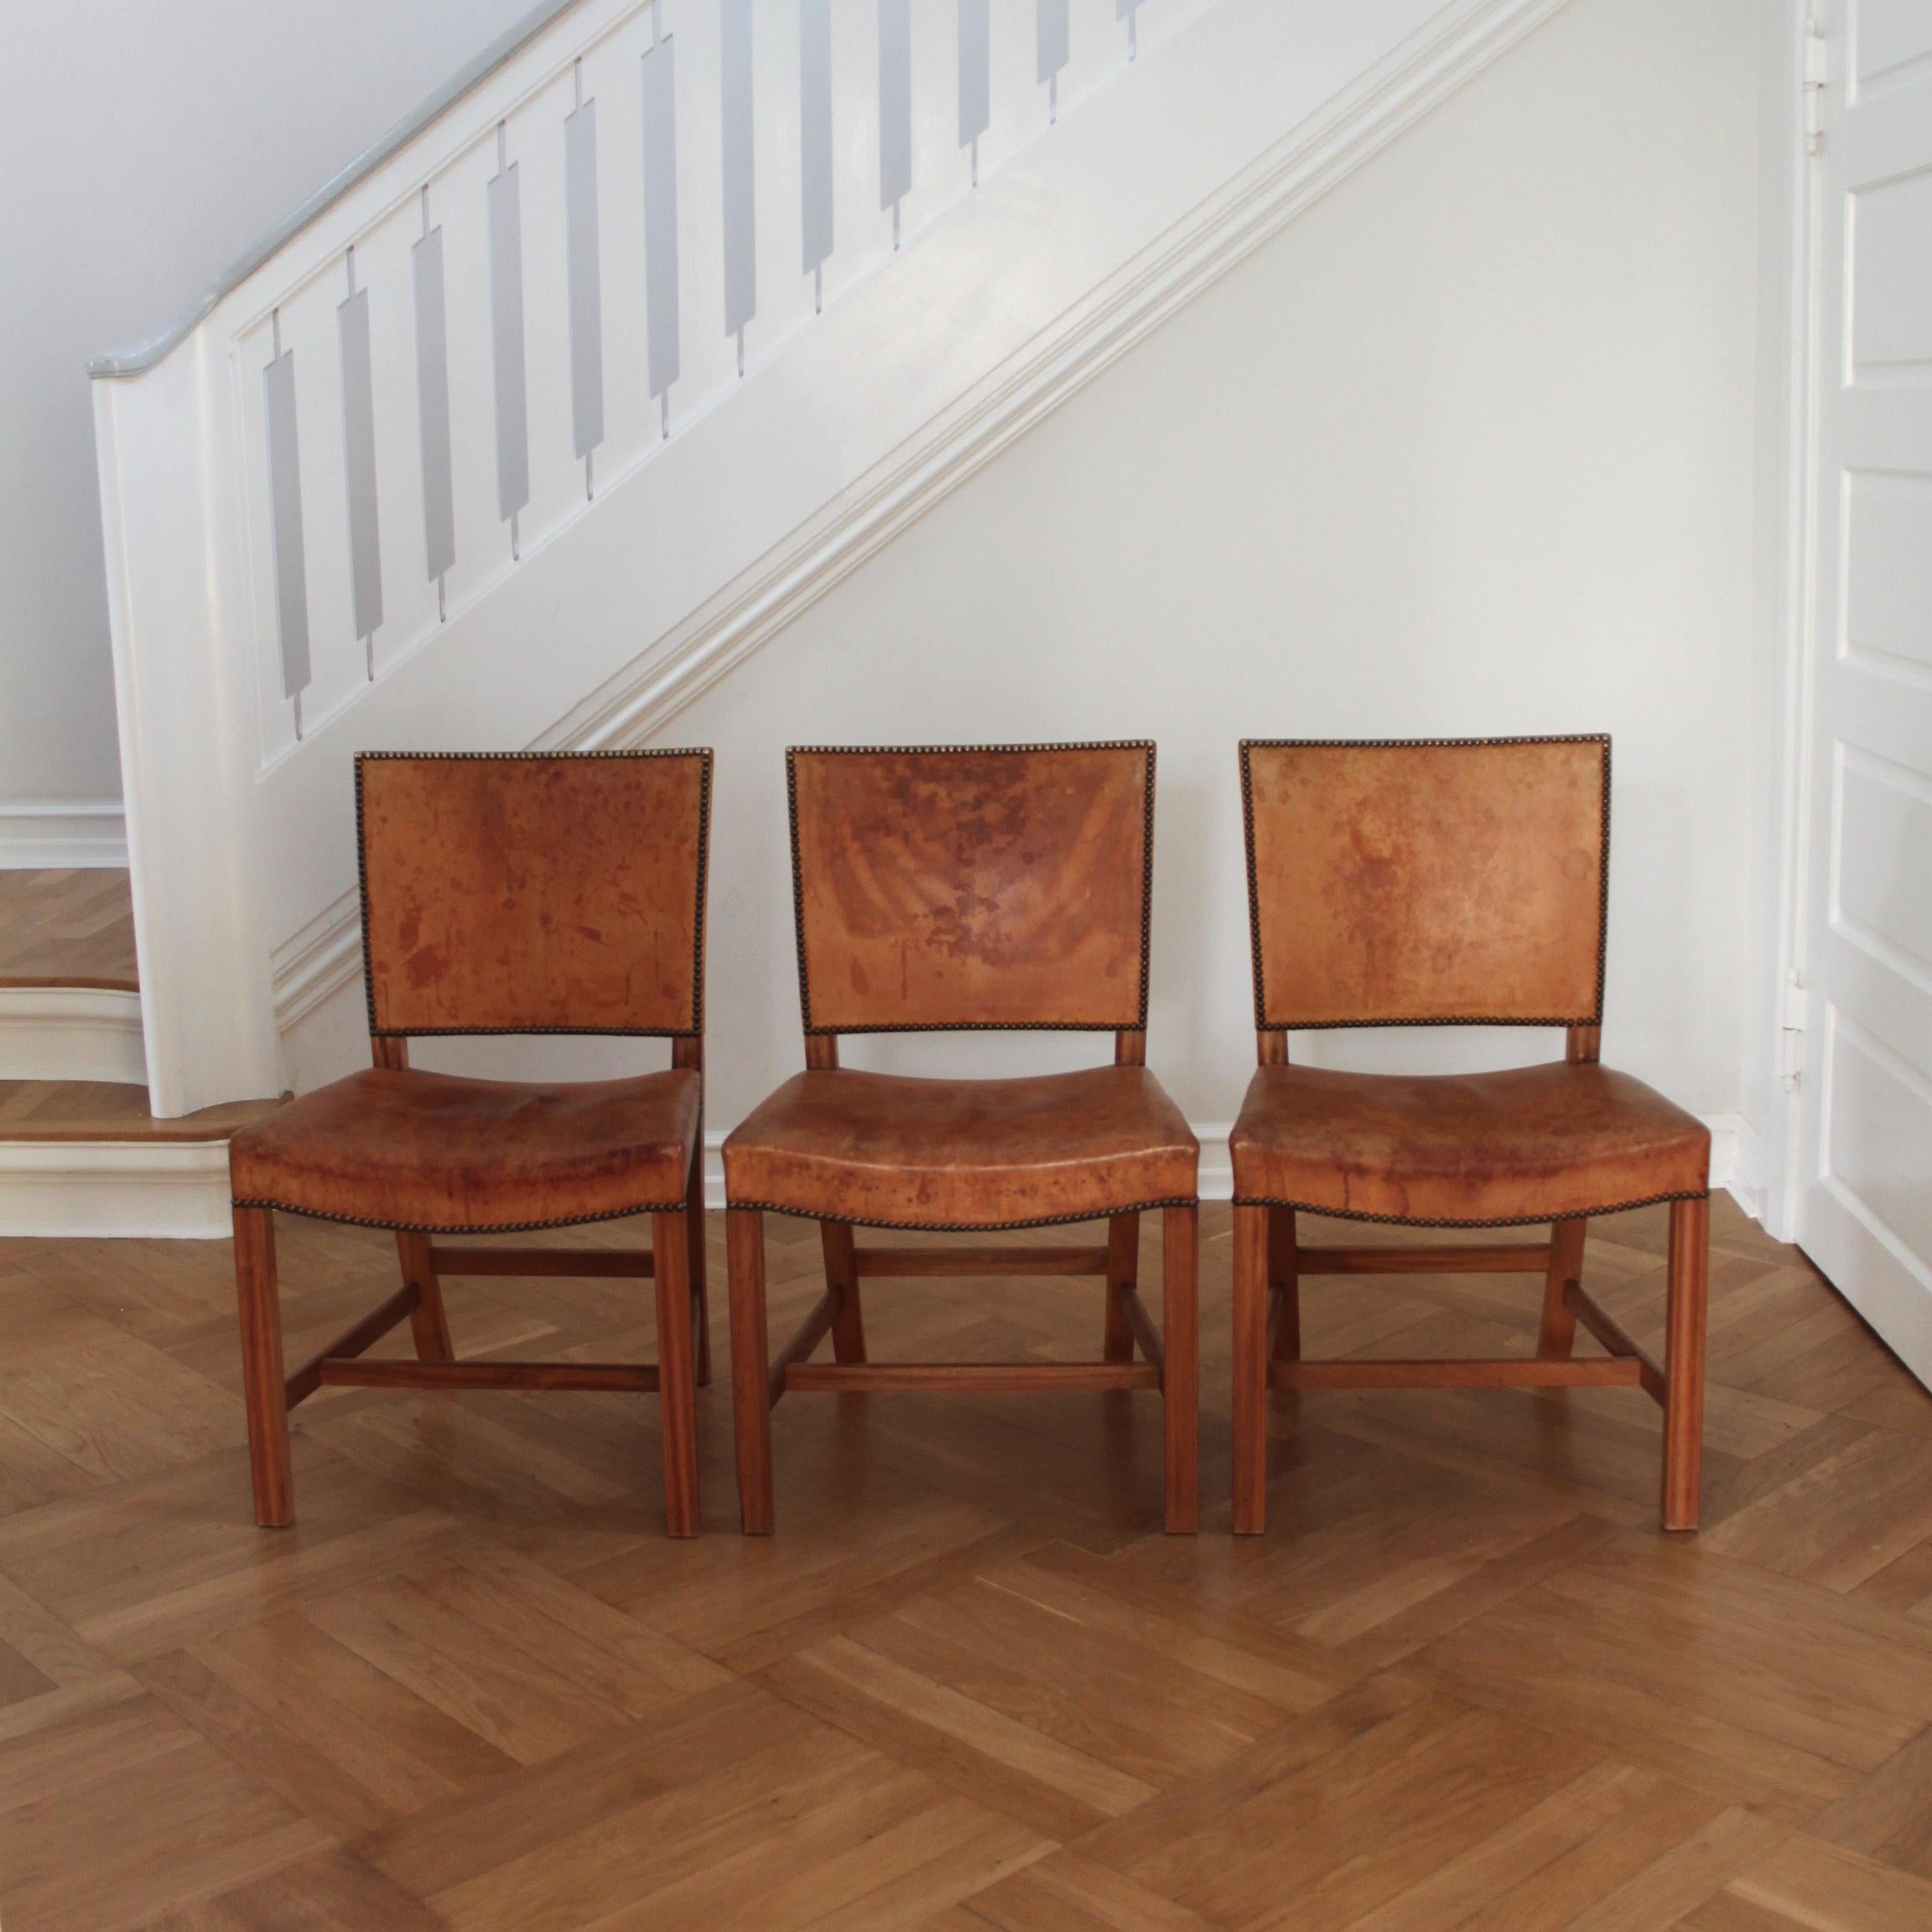 20th Century Six Kaare Klint Red Chairs, Mahogany and Original Niger Leather